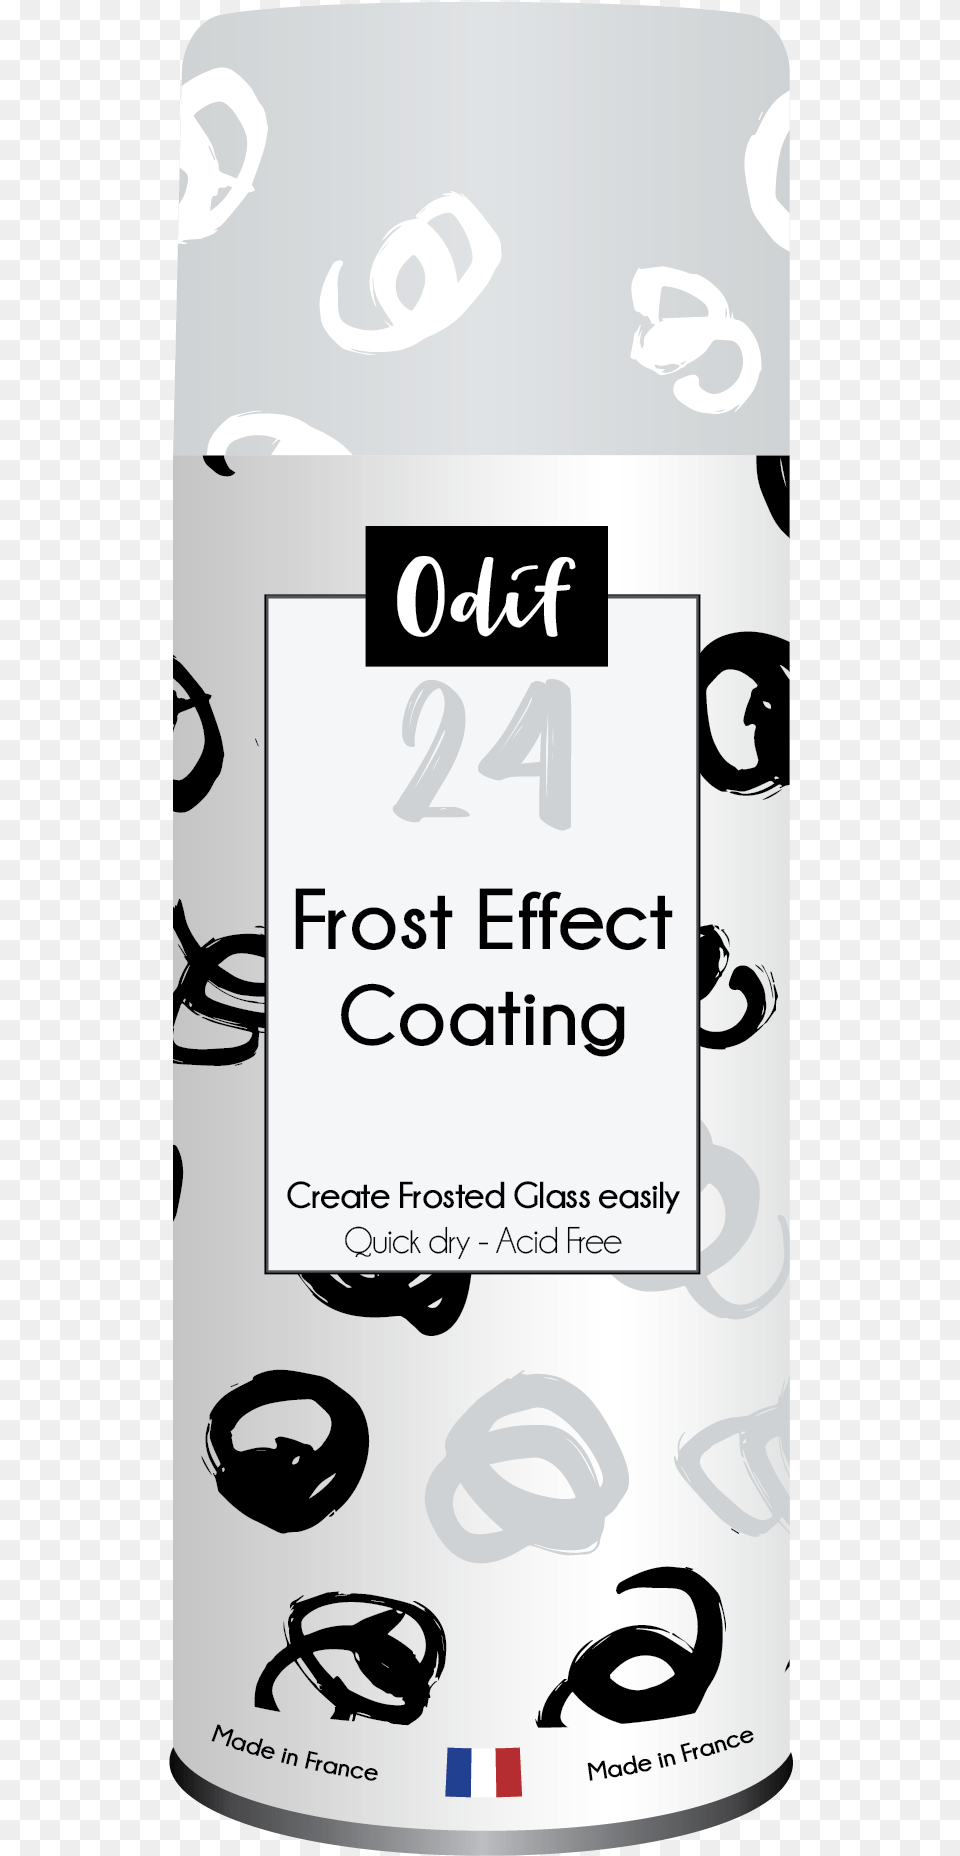 Frost Effect Coating Calligraphy, Advertisement, Poster Png